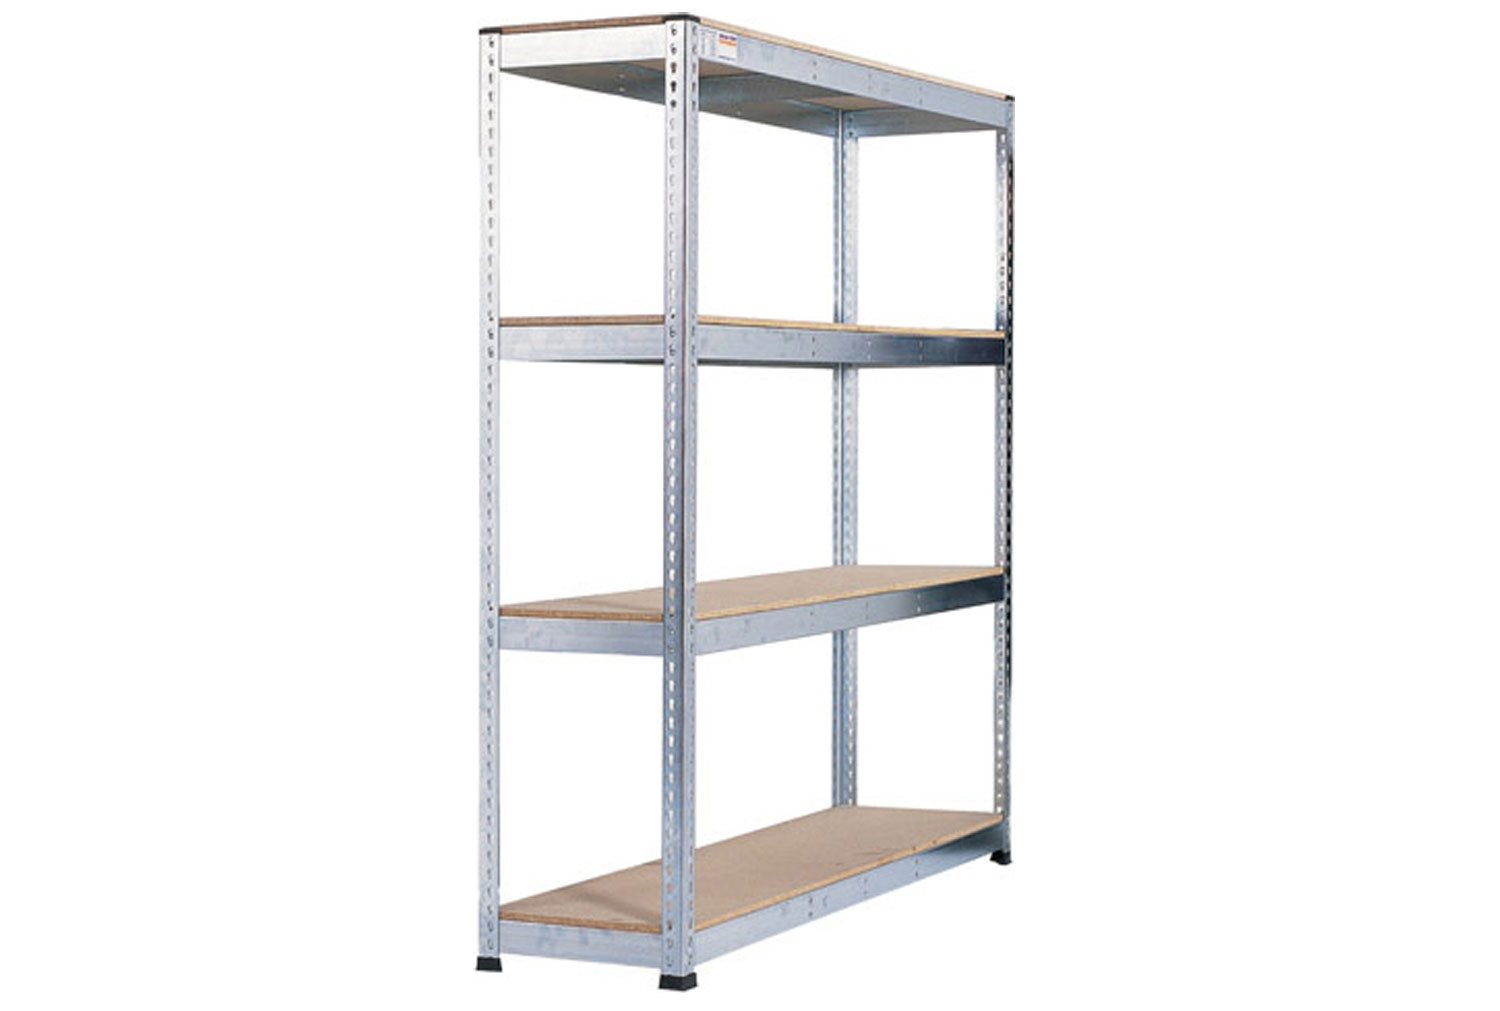 Rapid 1 Heavy Duty Galvanized Shelving With 4 Chipboard Shelves 1830wx2440h, Express Delivery